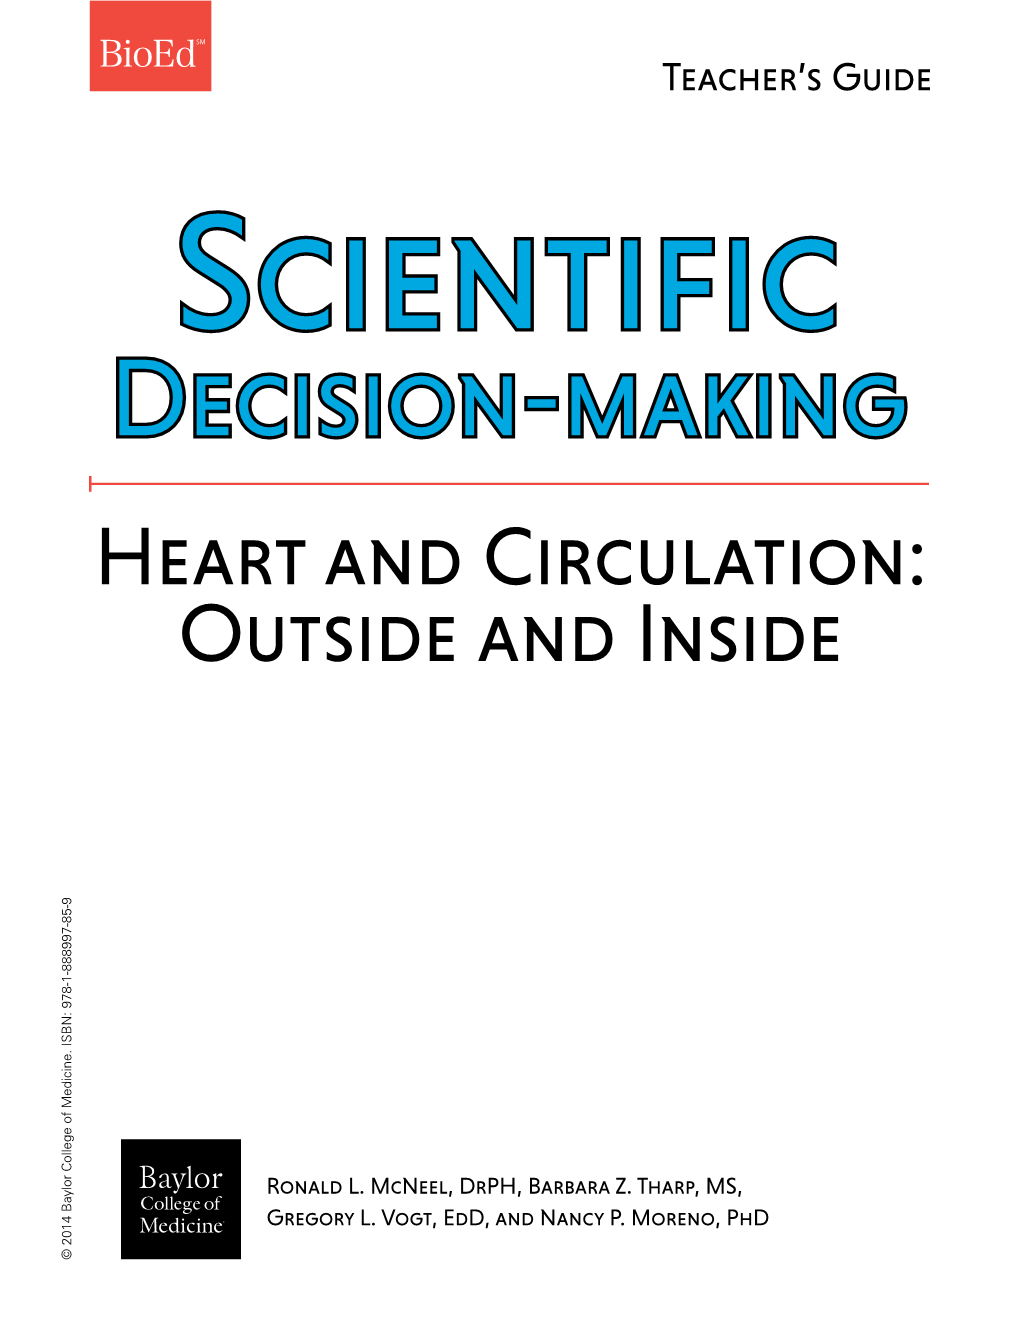 Heart and Circulation: Outside and Inside About the Project